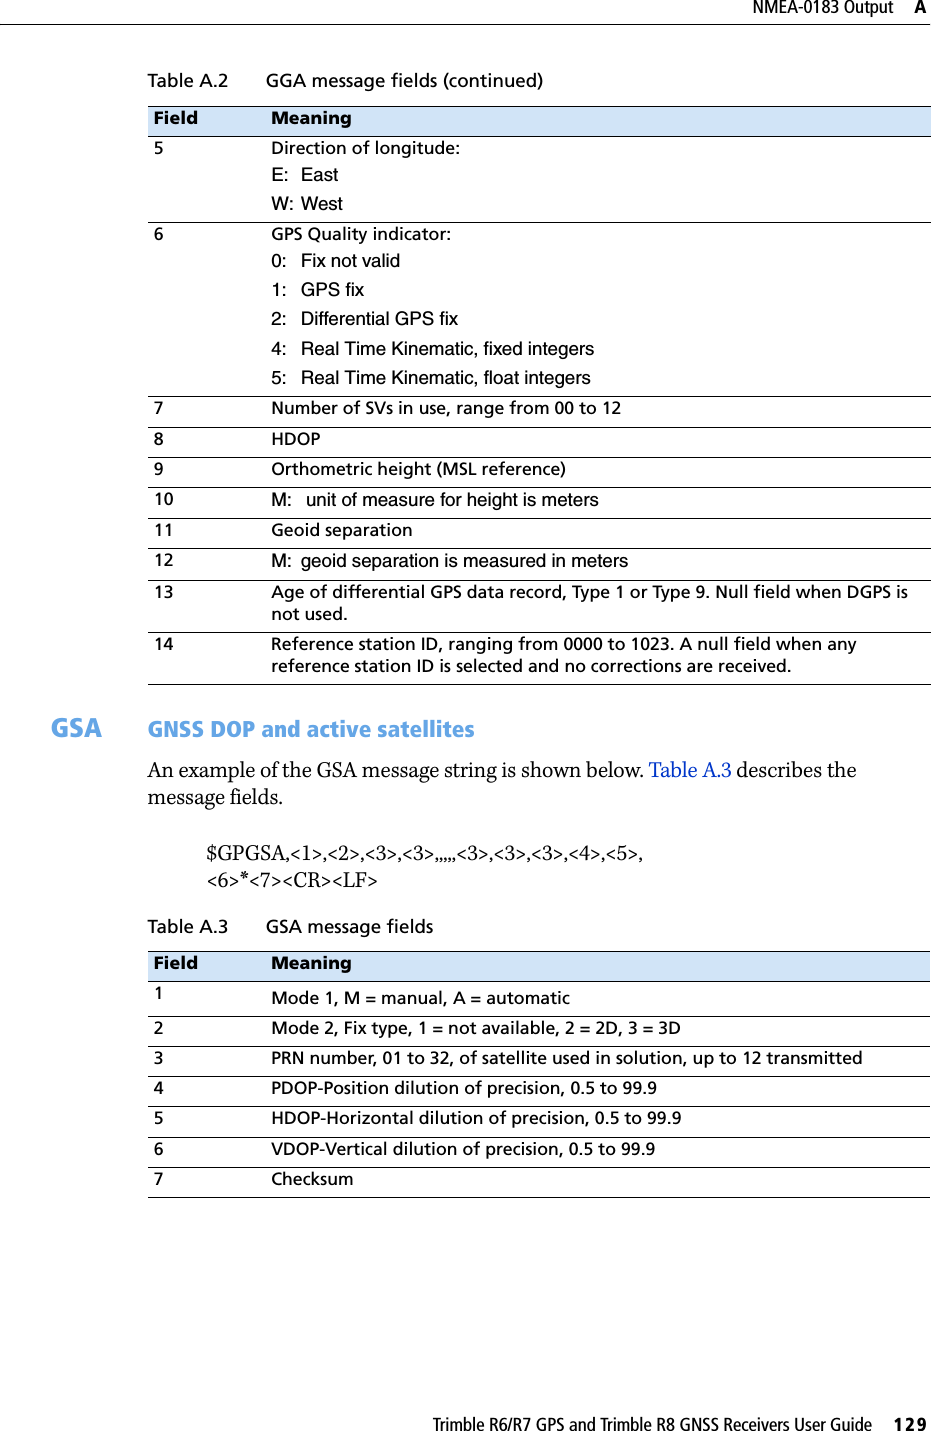 Trimble R6/R7 GPS and Trimble R8 GNSS Receivers User Guide     129NMEA-0183 Output     ATrimble R6 and R7 GPS/R8 GNSS Receiver Operation    GSA GNSS DOP and active satellitesAn example of the GSA message string is shown below. Table A.3 describes the message fields.$GPGSA,&lt;1&gt;,&lt;2&gt;,&lt;3&gt;,&lt;3&gt;,,,,,&lt;3&gt;,&lt;3&gt;,&lt;3&gt;,&lt;4&gt;,&lt;5&gt;,&lt;6&gt;*&lt;7&gt;&lt;CR&gt;&lt;LF&gt; 5 Direction of longitude:E: EastW: West6 GPS Quality indicator:0: Fix not valid1: GPS fix2: Differential GPS fix4: Real Time Kinematic, fixed integers5: Real Time Kinematic, float integers7 Number of SVs in use, range from 00 to 128 HDOP9 Orthometric height (MSL reference)10 M:  unit of measure for height is meters11 Geoid separation12 M: geoid separation is measured in meters13 Age of differential GPS data record, Type 1 or Type 9. Null field when DGPS is not used.14 Reference station ID, ranging from 0000 to 1023. A null field when any reference station ID is selected and no corrections are received.Table A.3 GSA message fieldsField Meaning1Mode 1, M = manual, A = automatic2 Mode 2, Fix type, 1 = not available, 2 = 2D, 3 = 3D3 PRN number, 01 to 32, of satellite used in solution, up to 12 transmitted4 PDOP-Position dilution of precision, 0.5 to 99.95 HDOP-Horizontal dilution of precision, 0.5 to 99.96 VDOP-Vertical dilution of precision, 0.5 to 99.97ChecksumTable A.2 GGA message fields (continued)Field Meaning